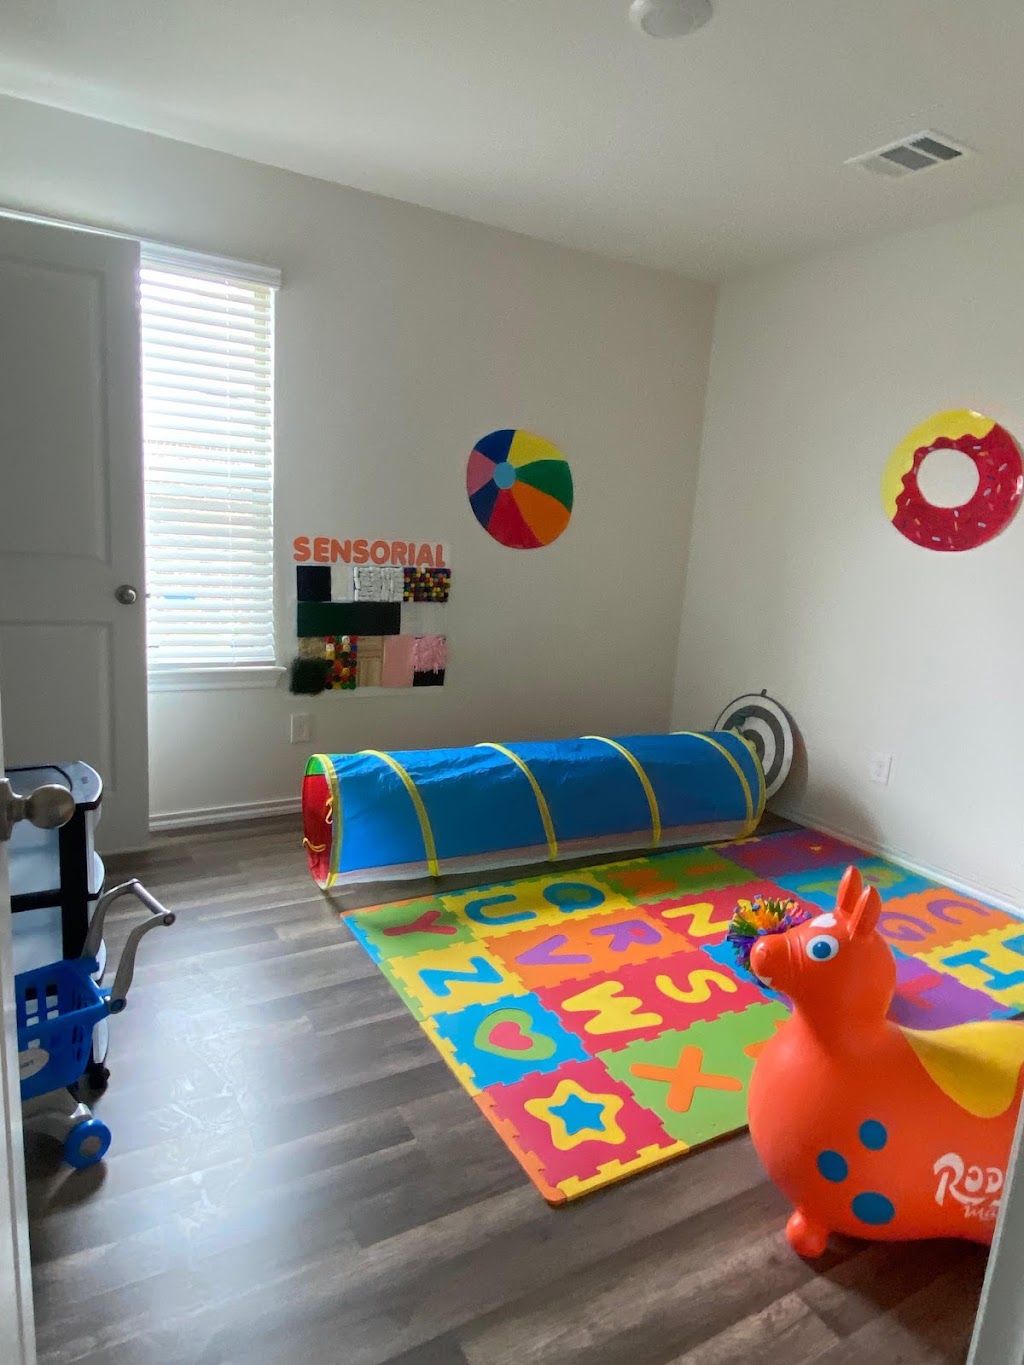 The Spanish Home Daycare | 4116 Fitzgerald Ave, Aubrey, TX 76227, USA | Phone: (469) 537-8130